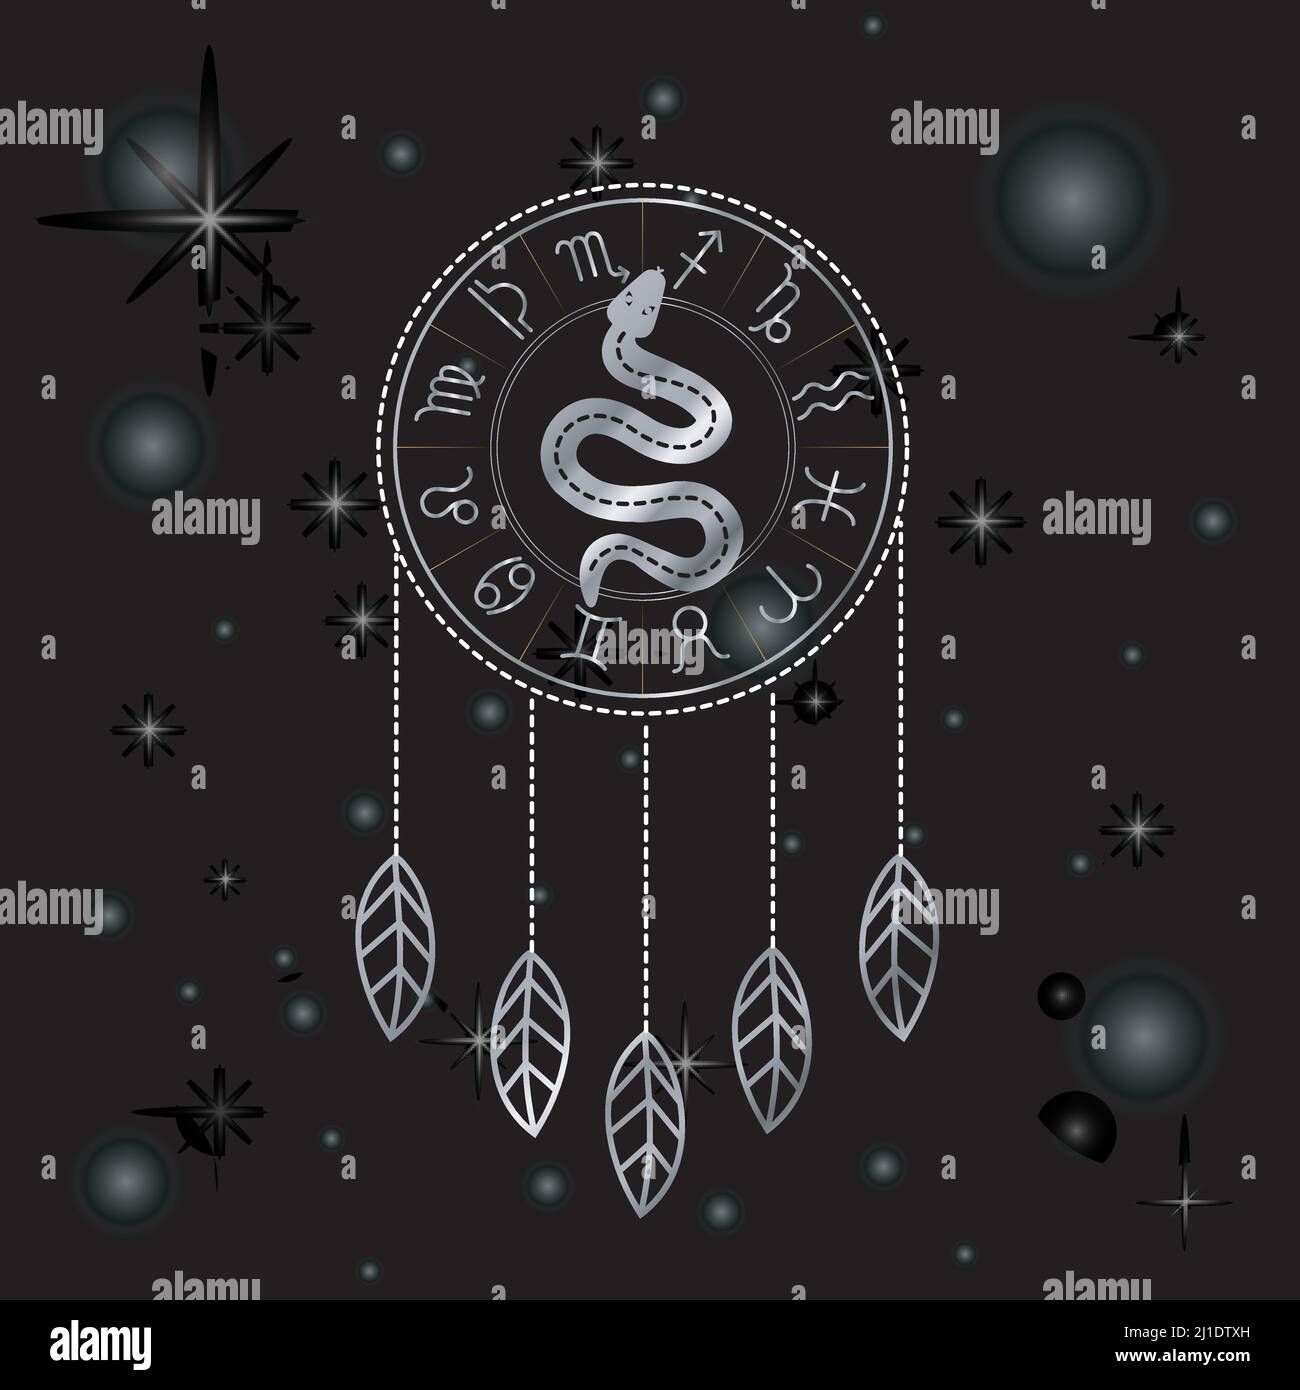 Dreamcatcher Zodiac symbols astrology horoscope signs with mystic snake in silver Stock Vector